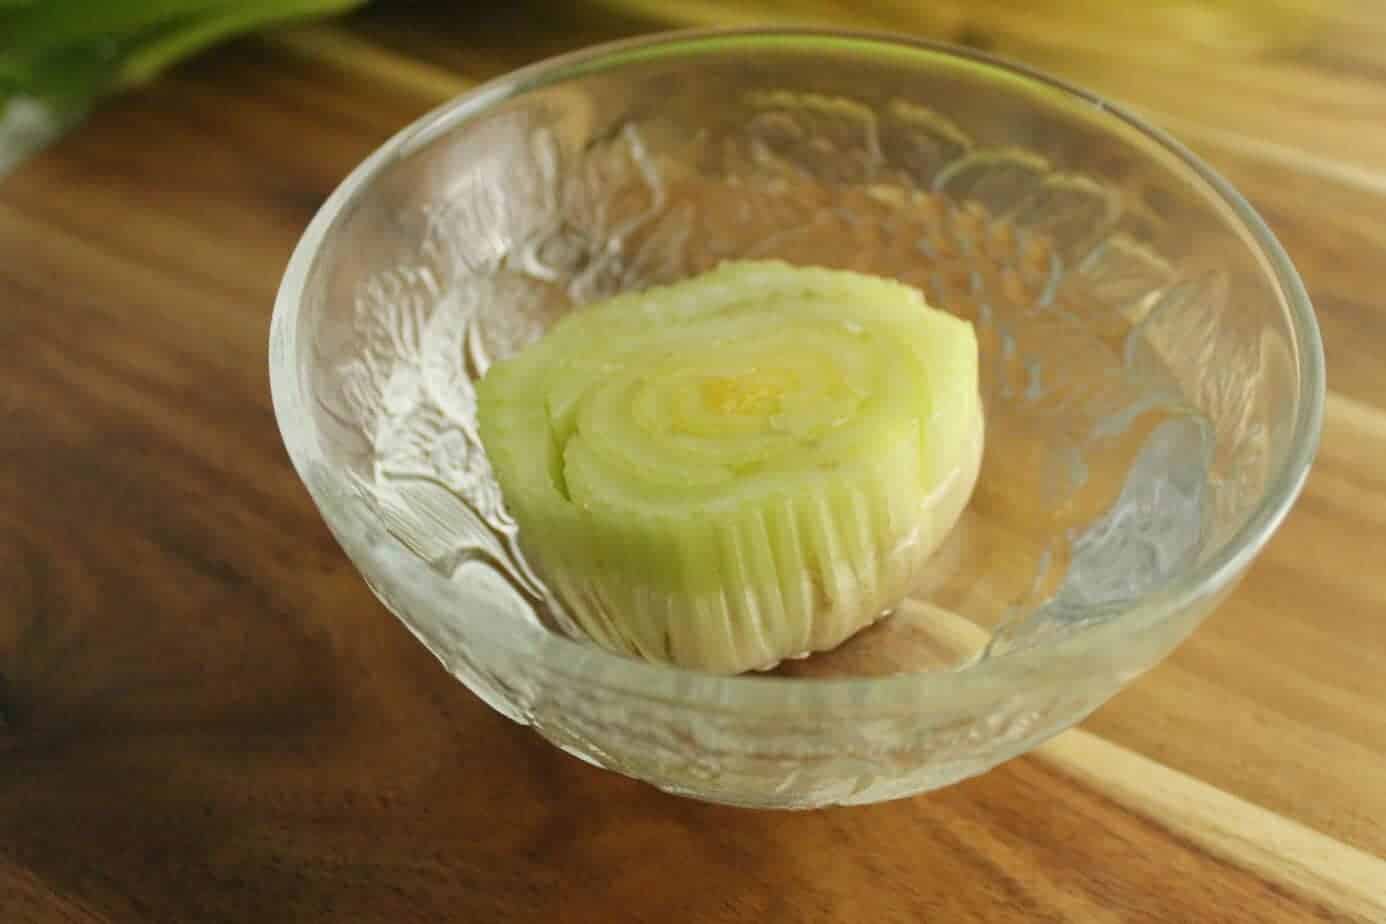 How to re-grow celery at home